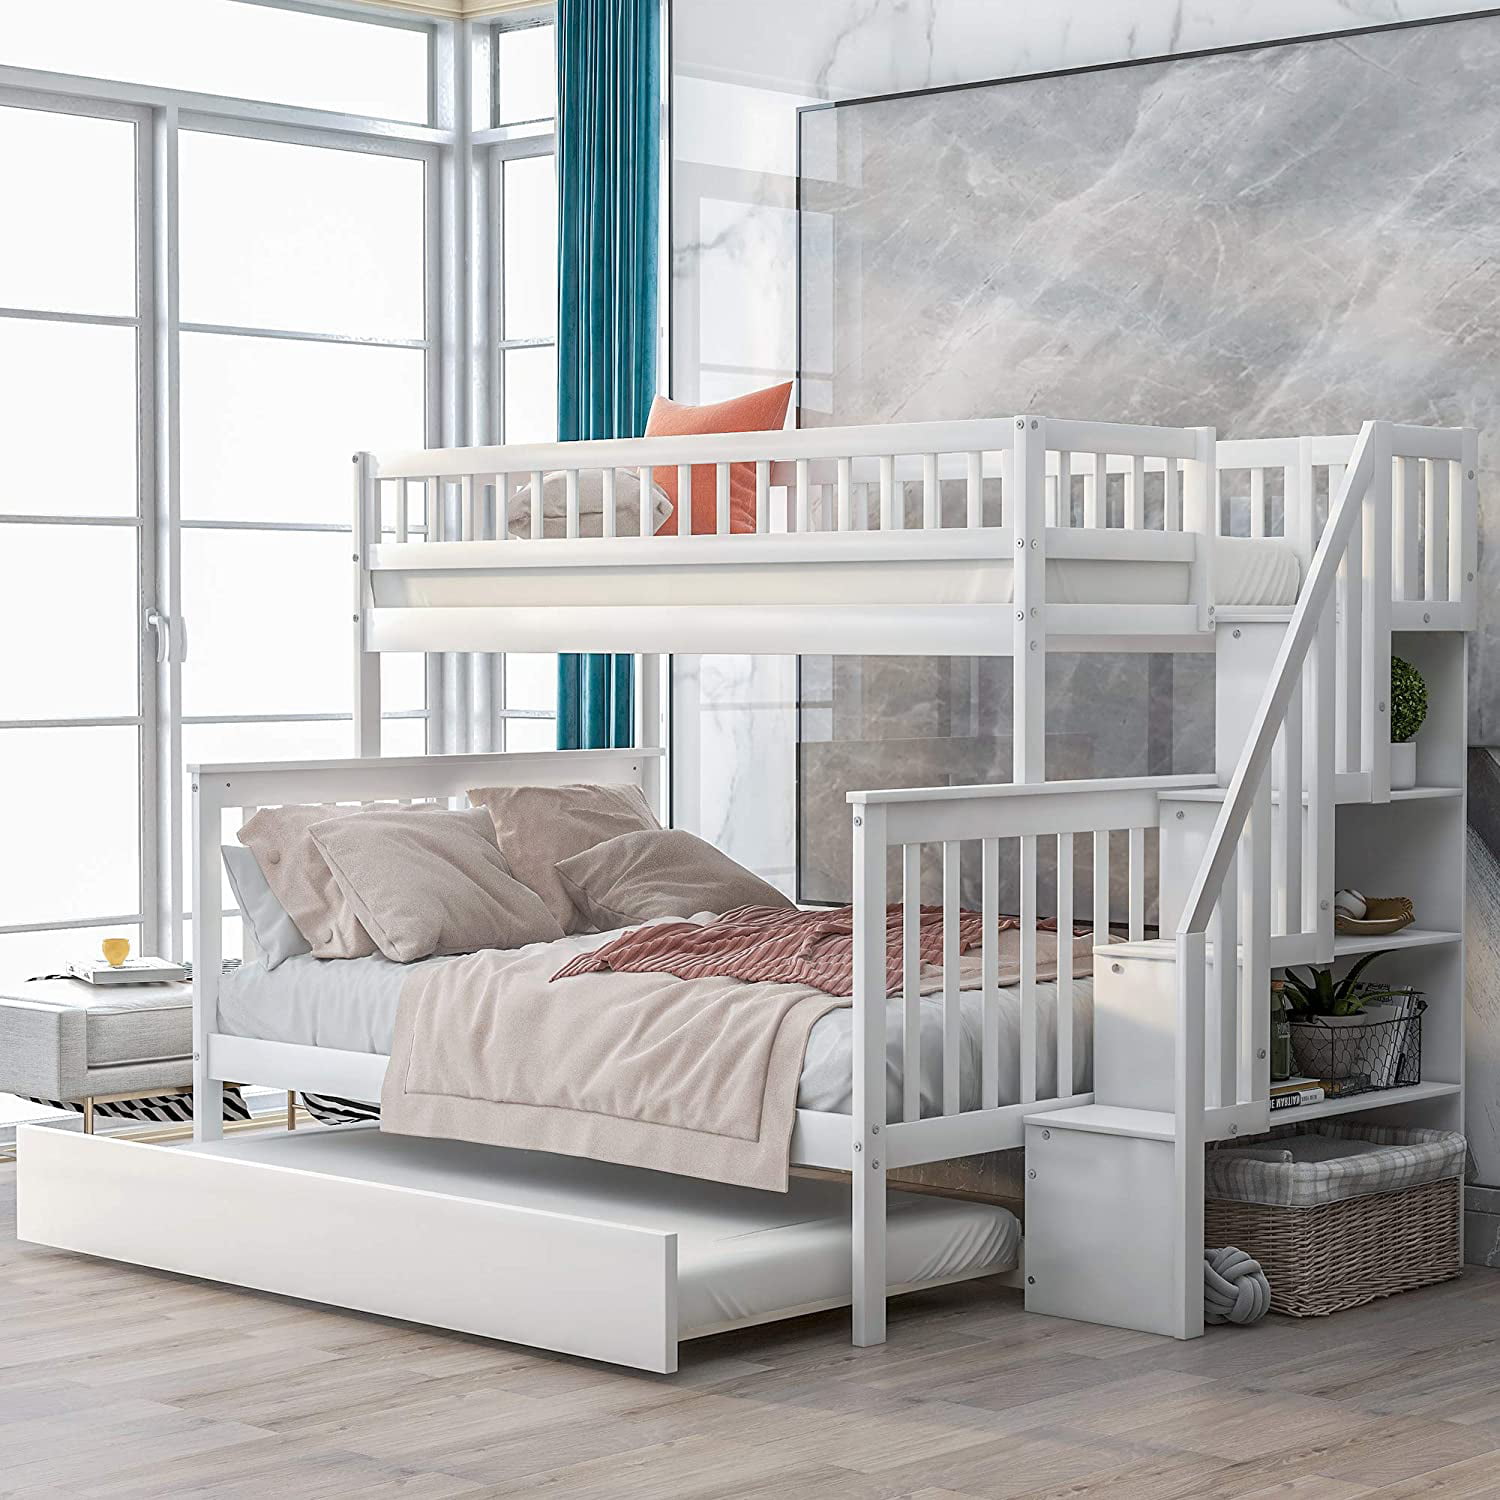 Piscis Bunk Bed Beds Twin Over, Full Size Bunk Beds With Stairs And Trundle